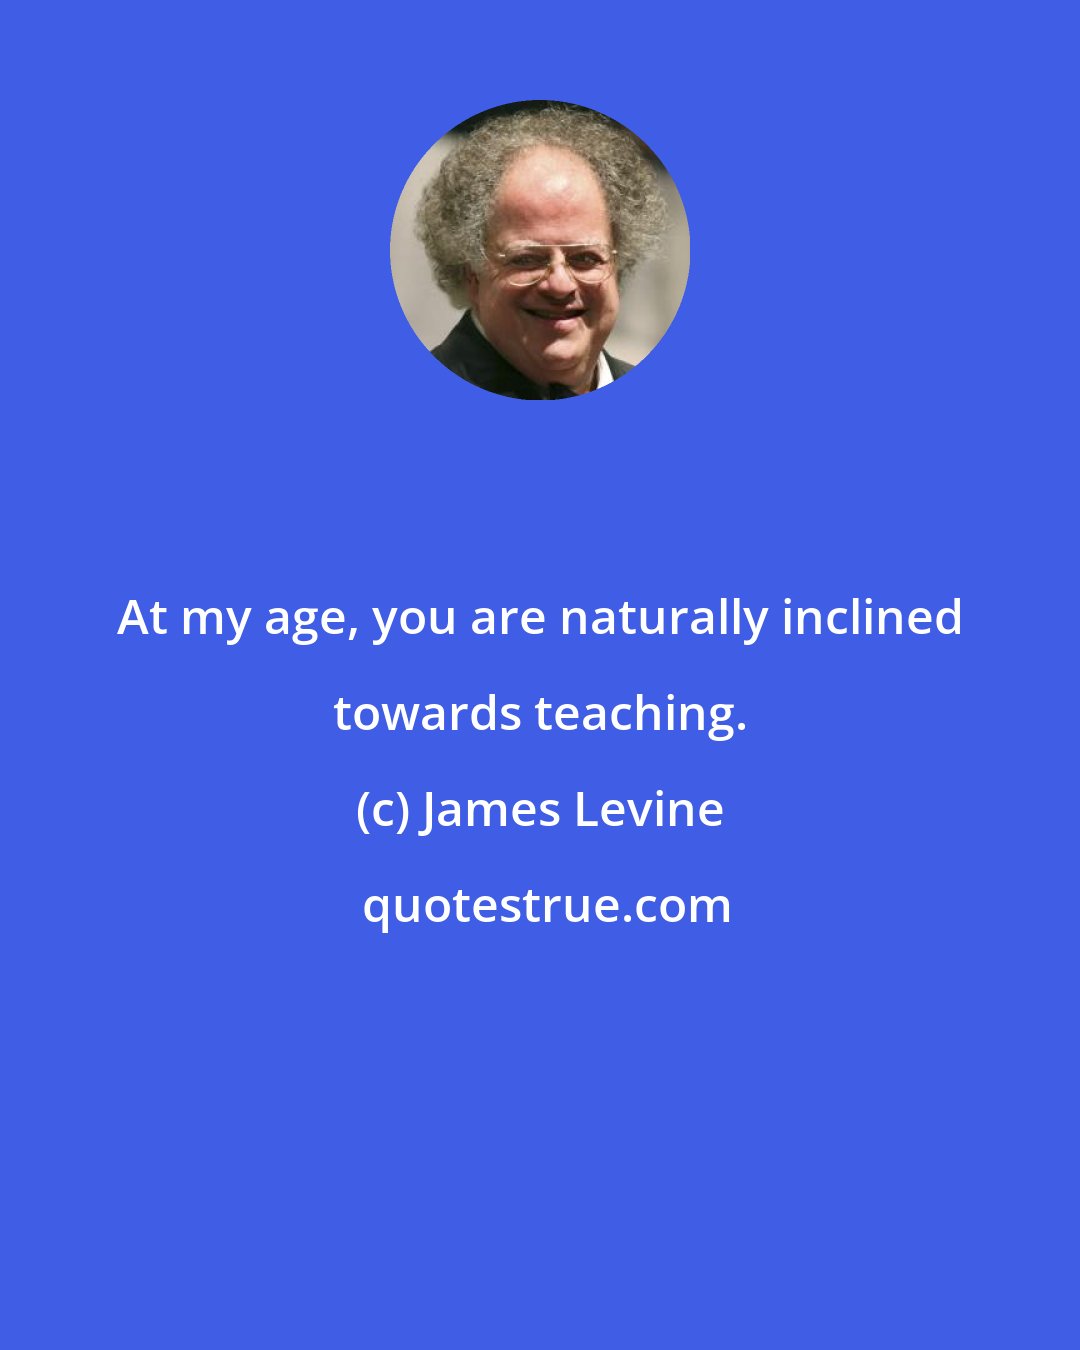 James Levine: At my age, you are naturally inclined towards teaching.